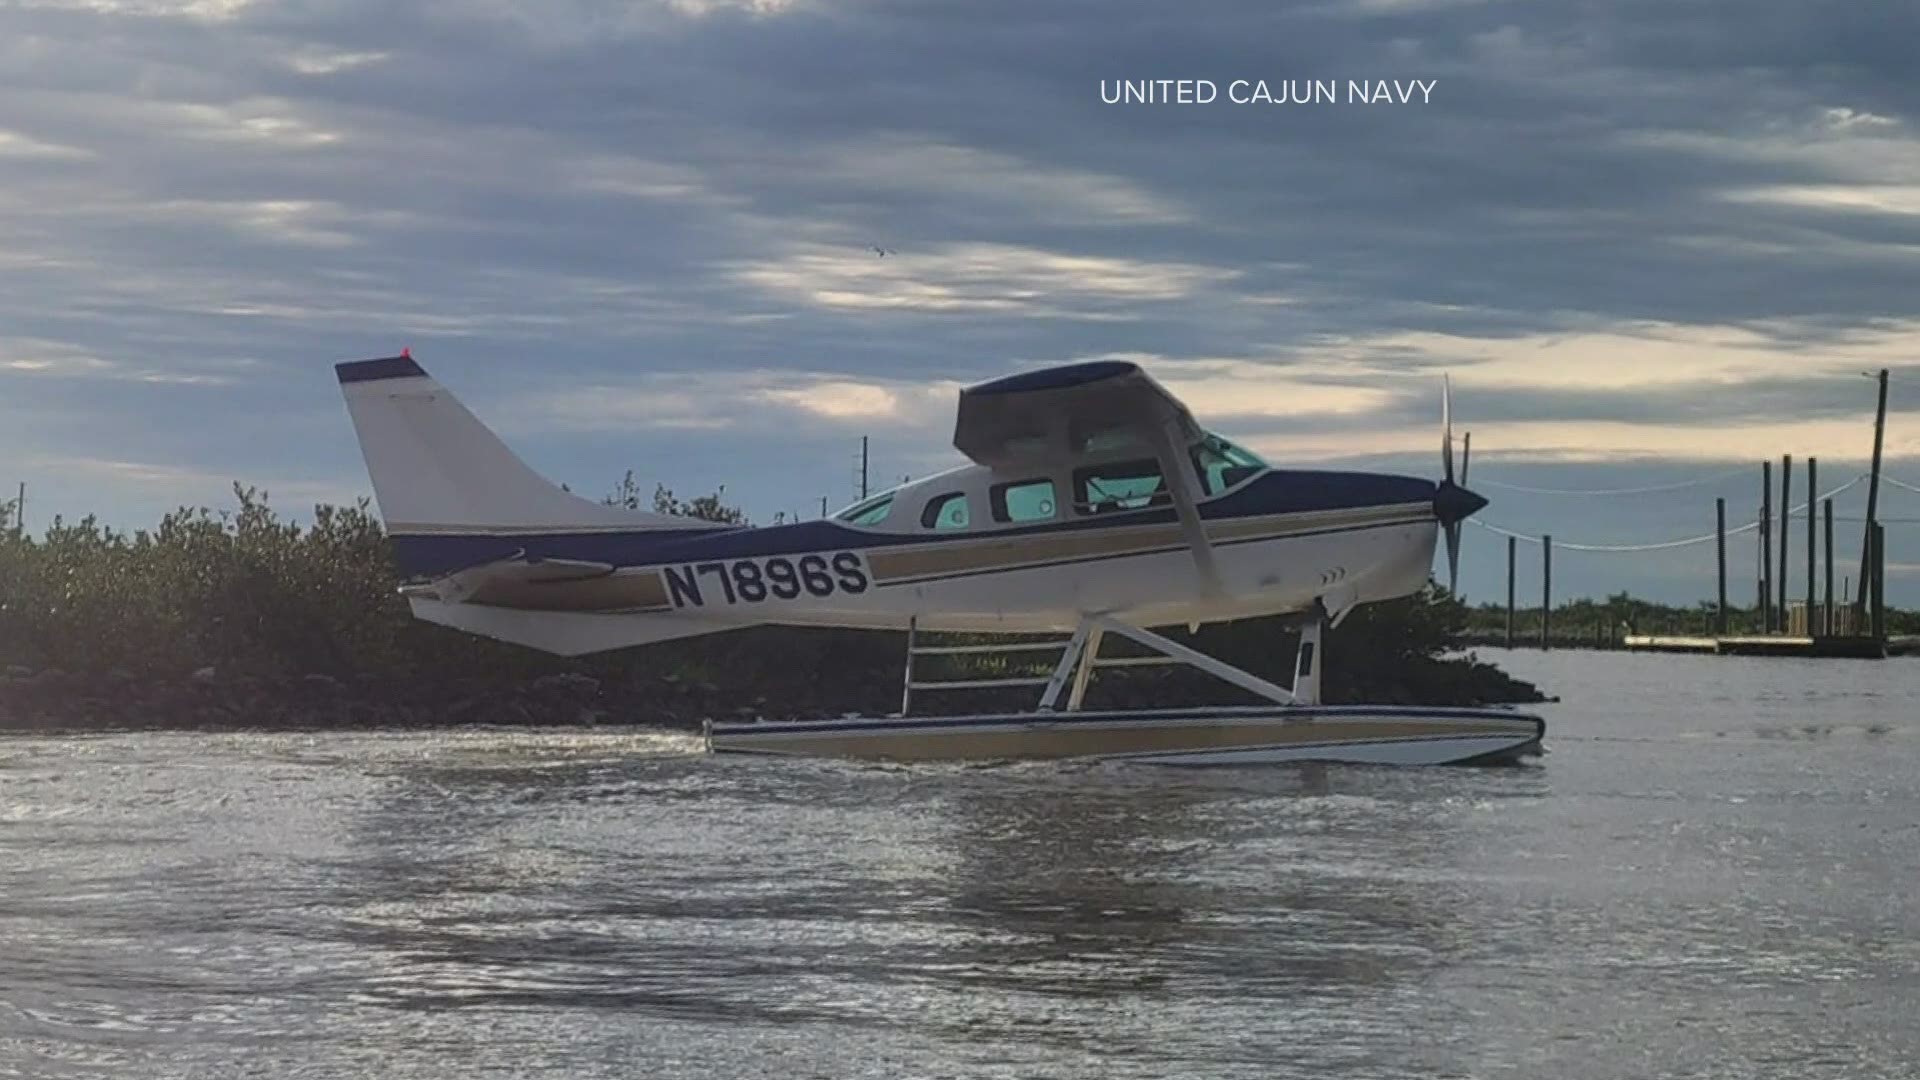 After the Coast Guard called off their search for the remaining missing crew members, the United Cajun Navy decided to take over the operation and search by air.